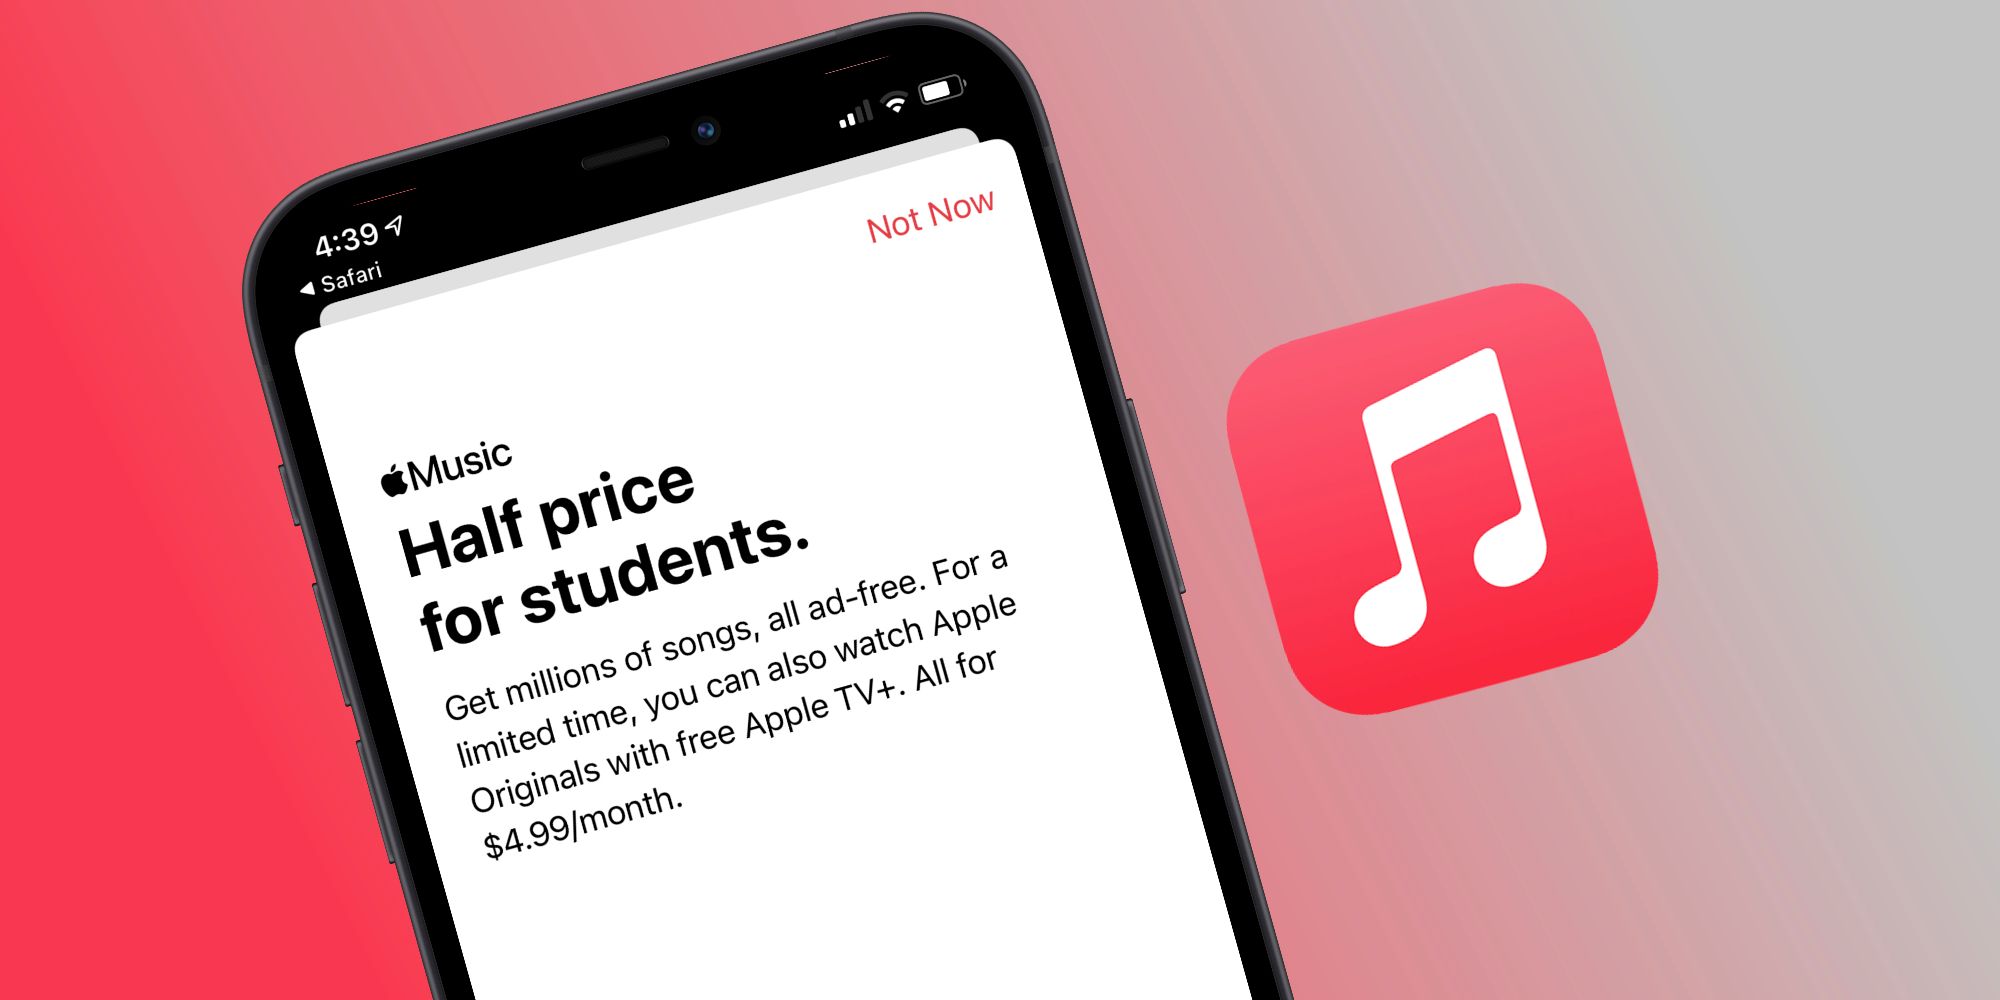 when is apple student discount 2021